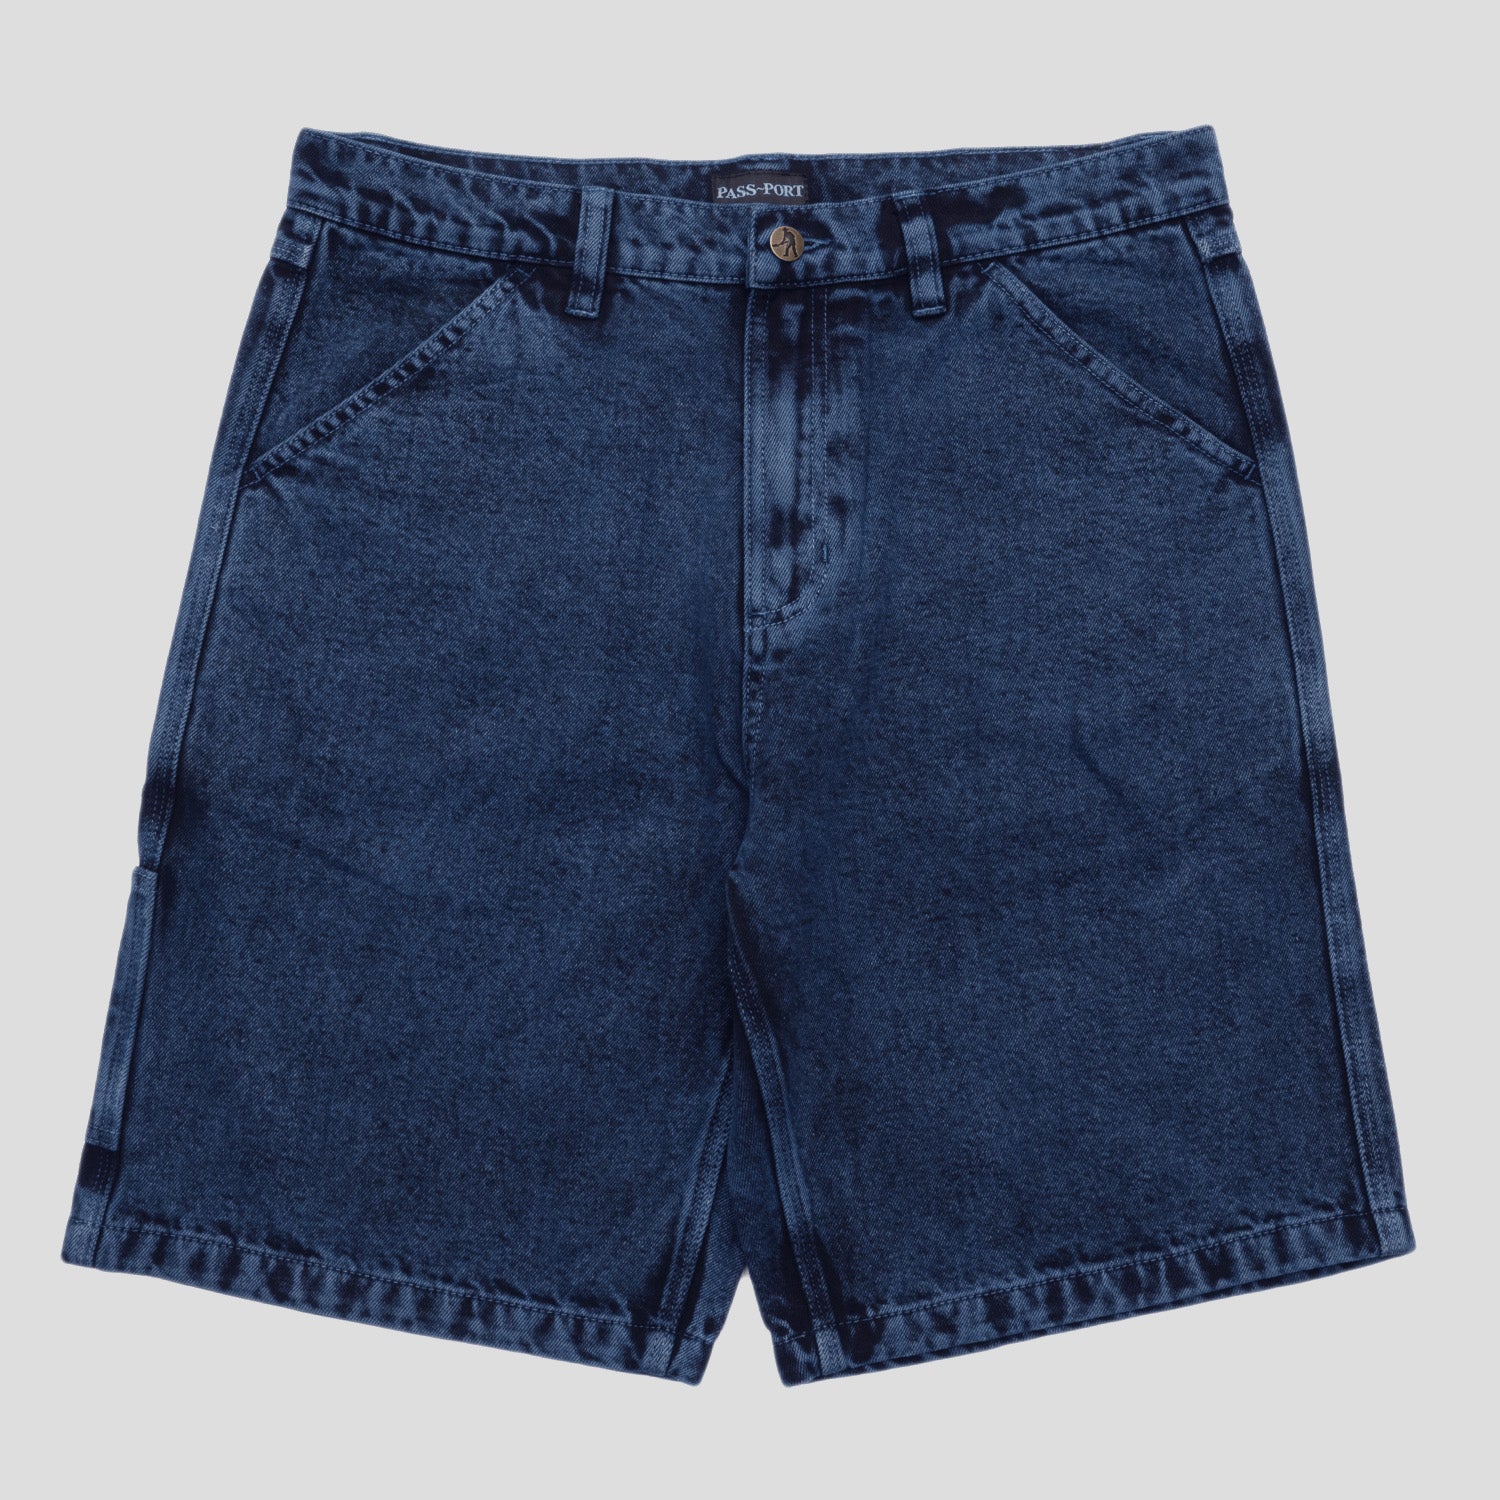 Pass~Port Workers Club Short - Navy Over-Dye